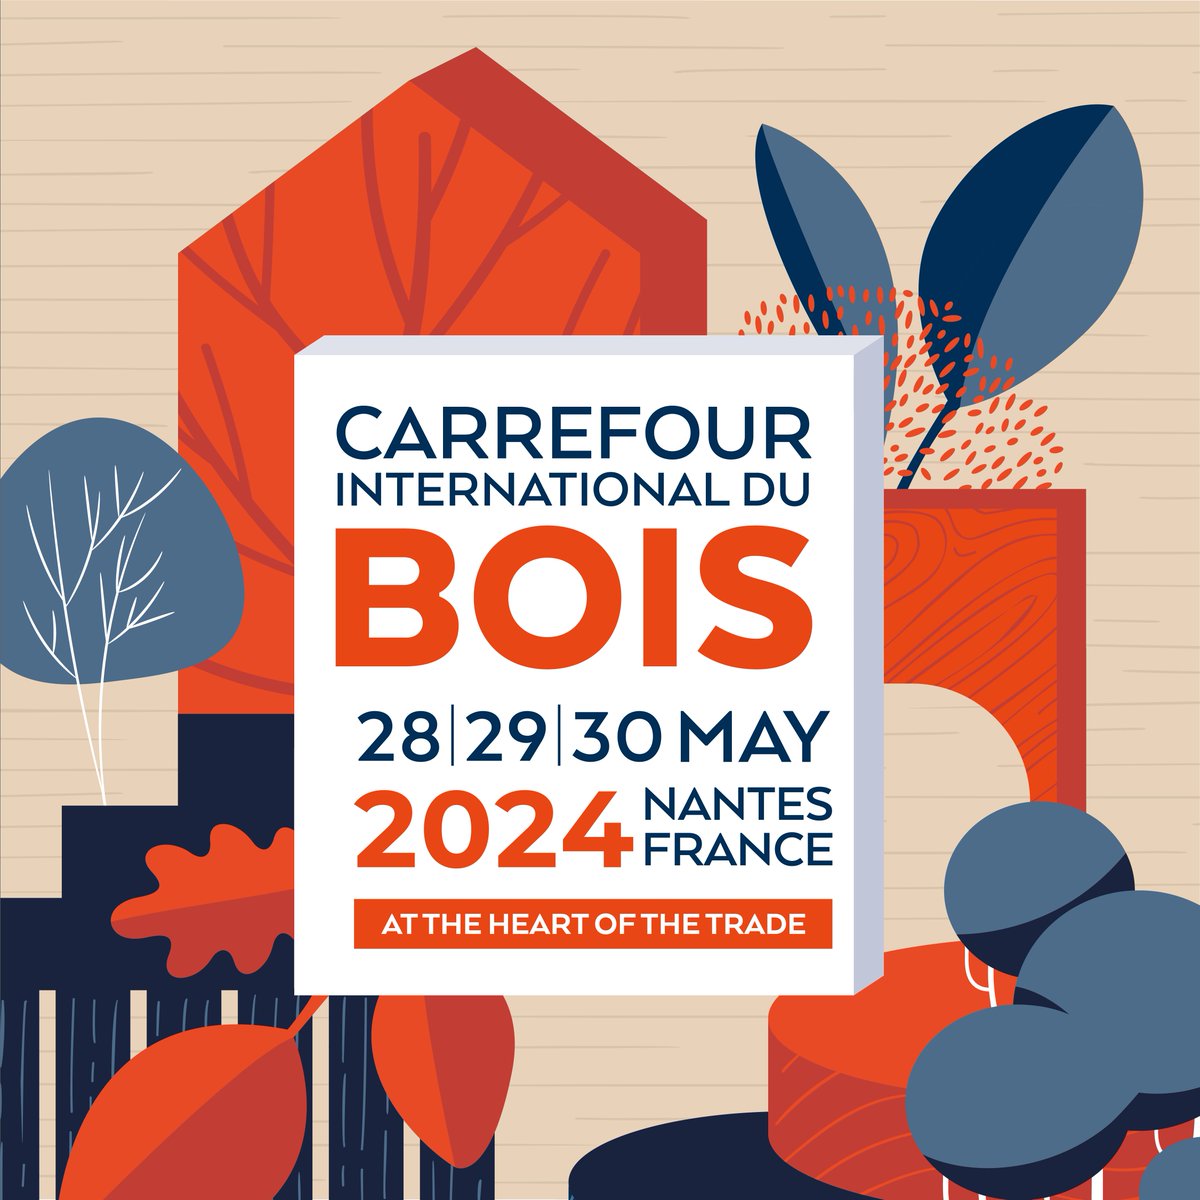 🤝We are partnering with Carrefour International Du Bois, the largest timber trade show in Europe, to offer VIP networking opportunities 🔎Find out more and regular tickets on the Conference website ⭐VIP Tickets are for TDUK members only, link below 🔗ow.ly/mrIw50Ri4JP